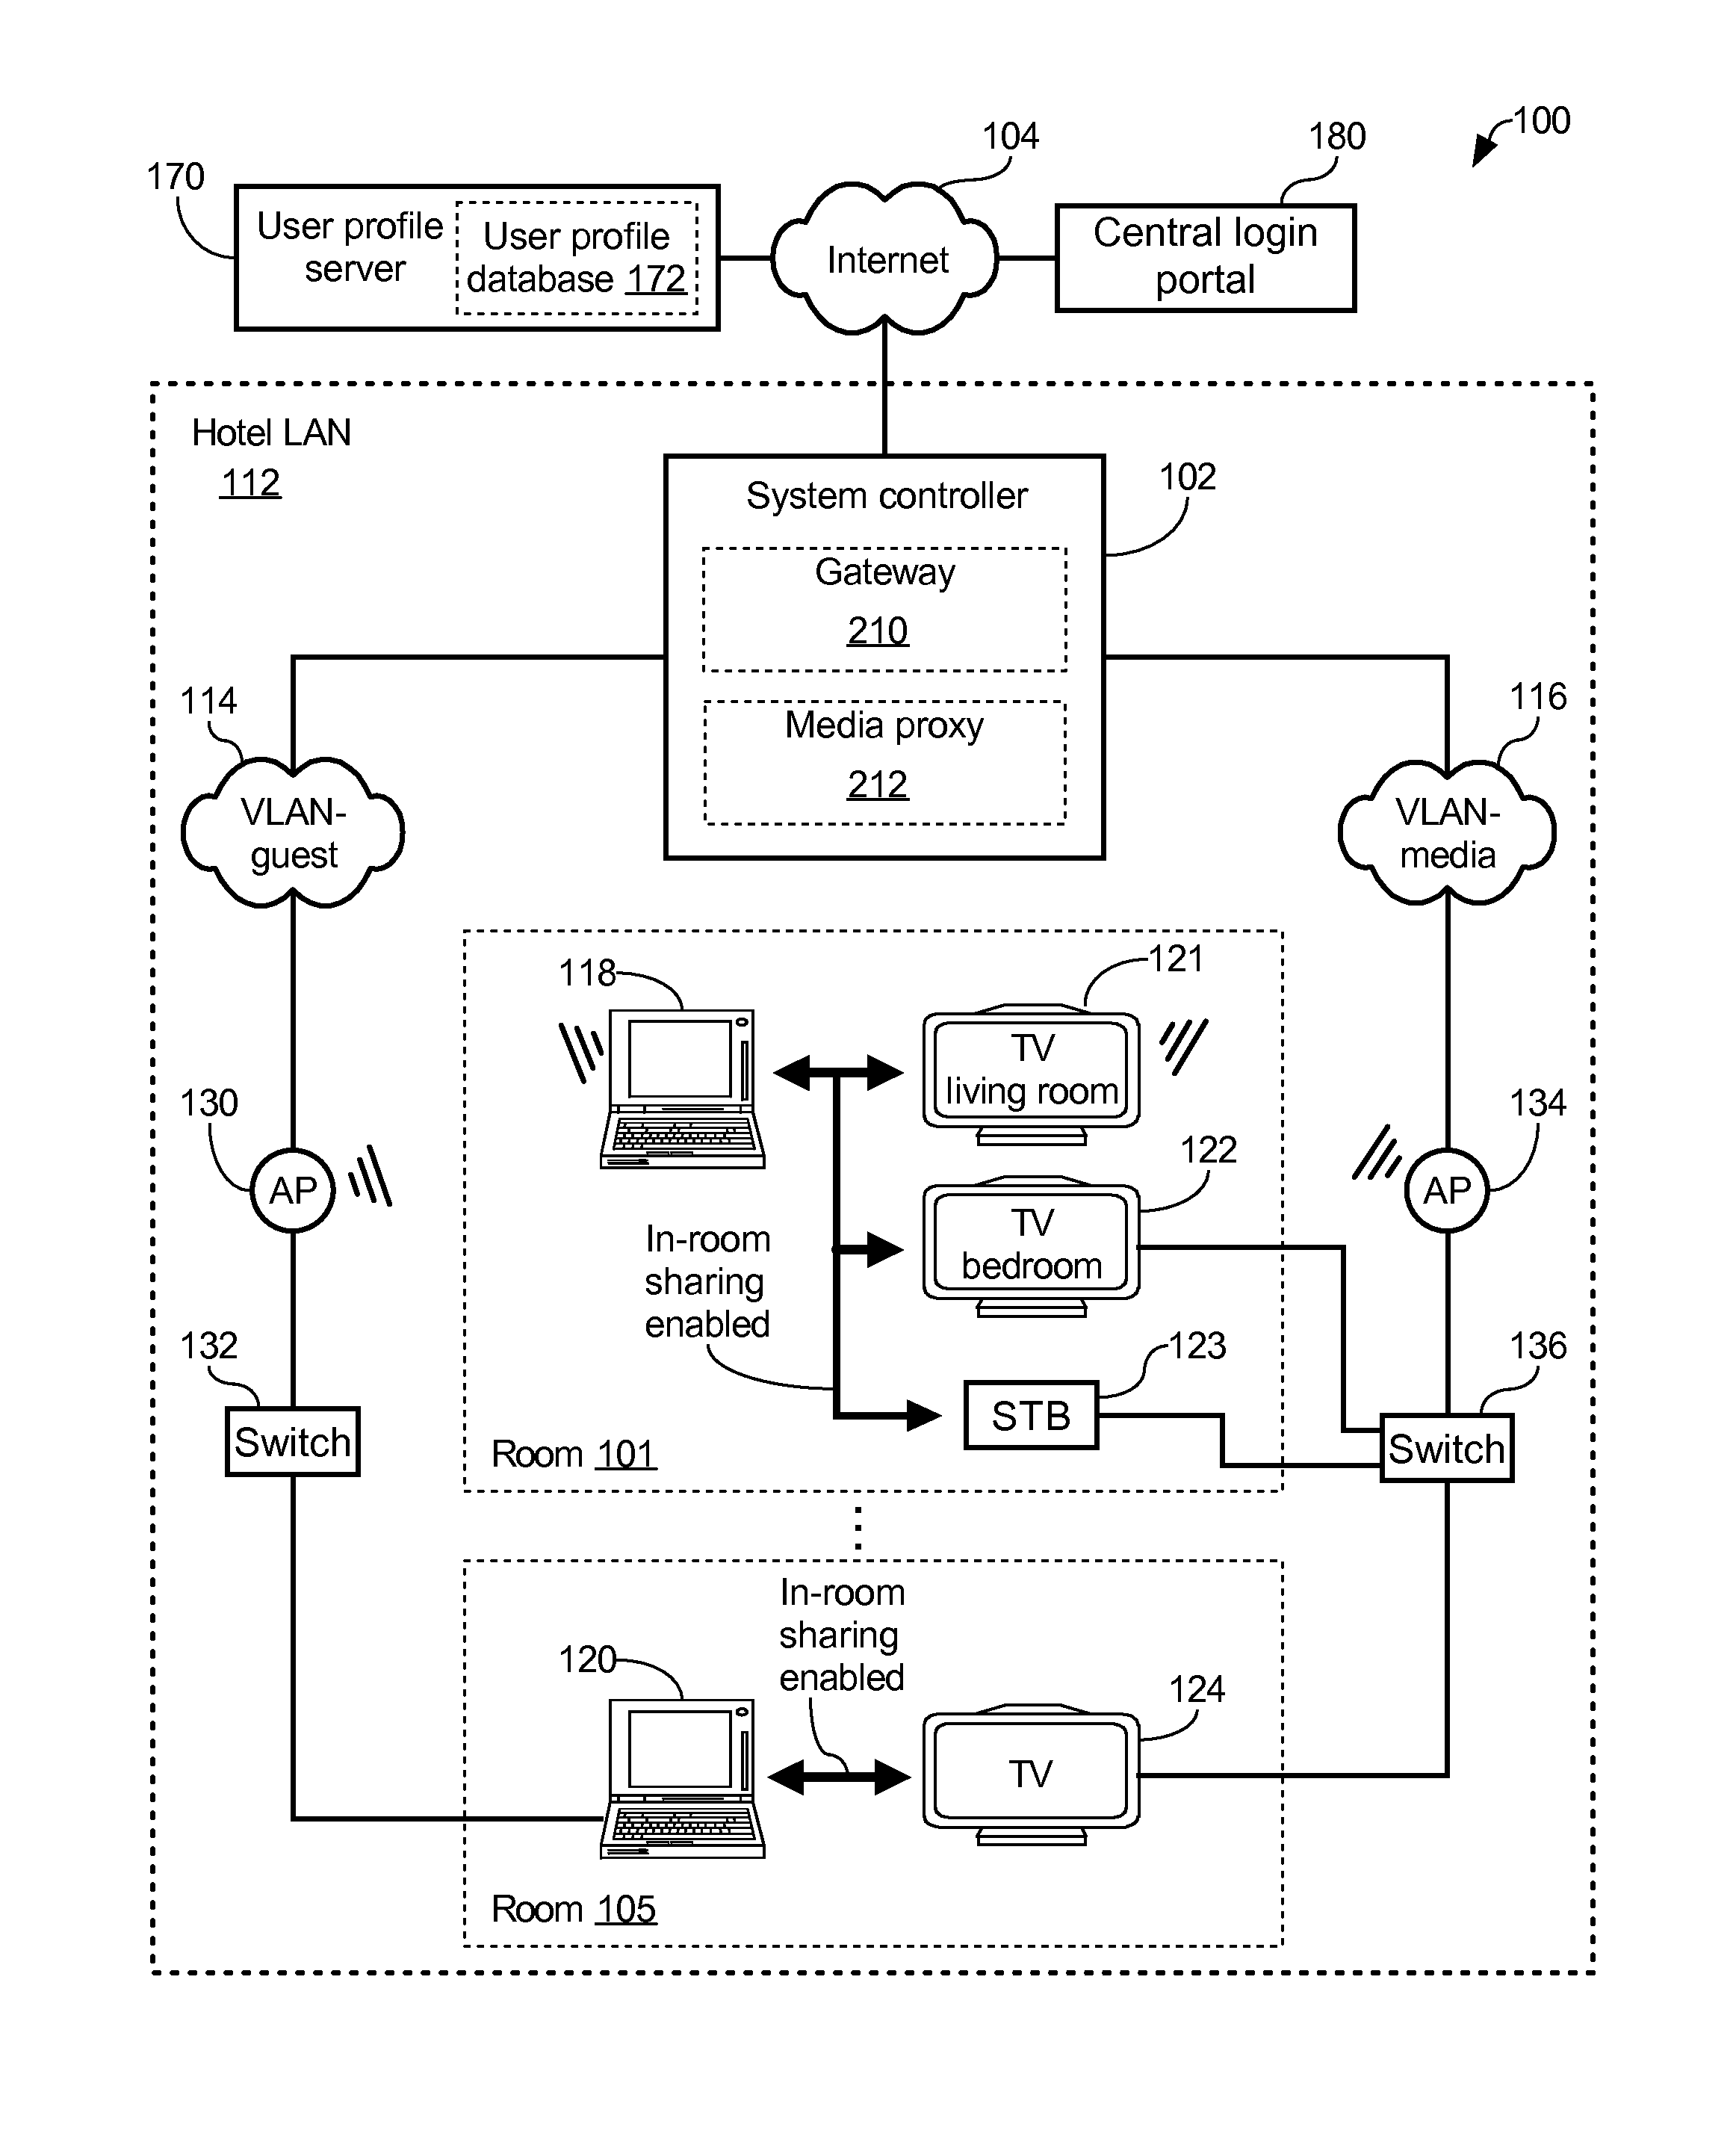 Dynamically enabling guest device supporting network-based media sharing protocol to share media content over computer network with subset of media devices connected thereto